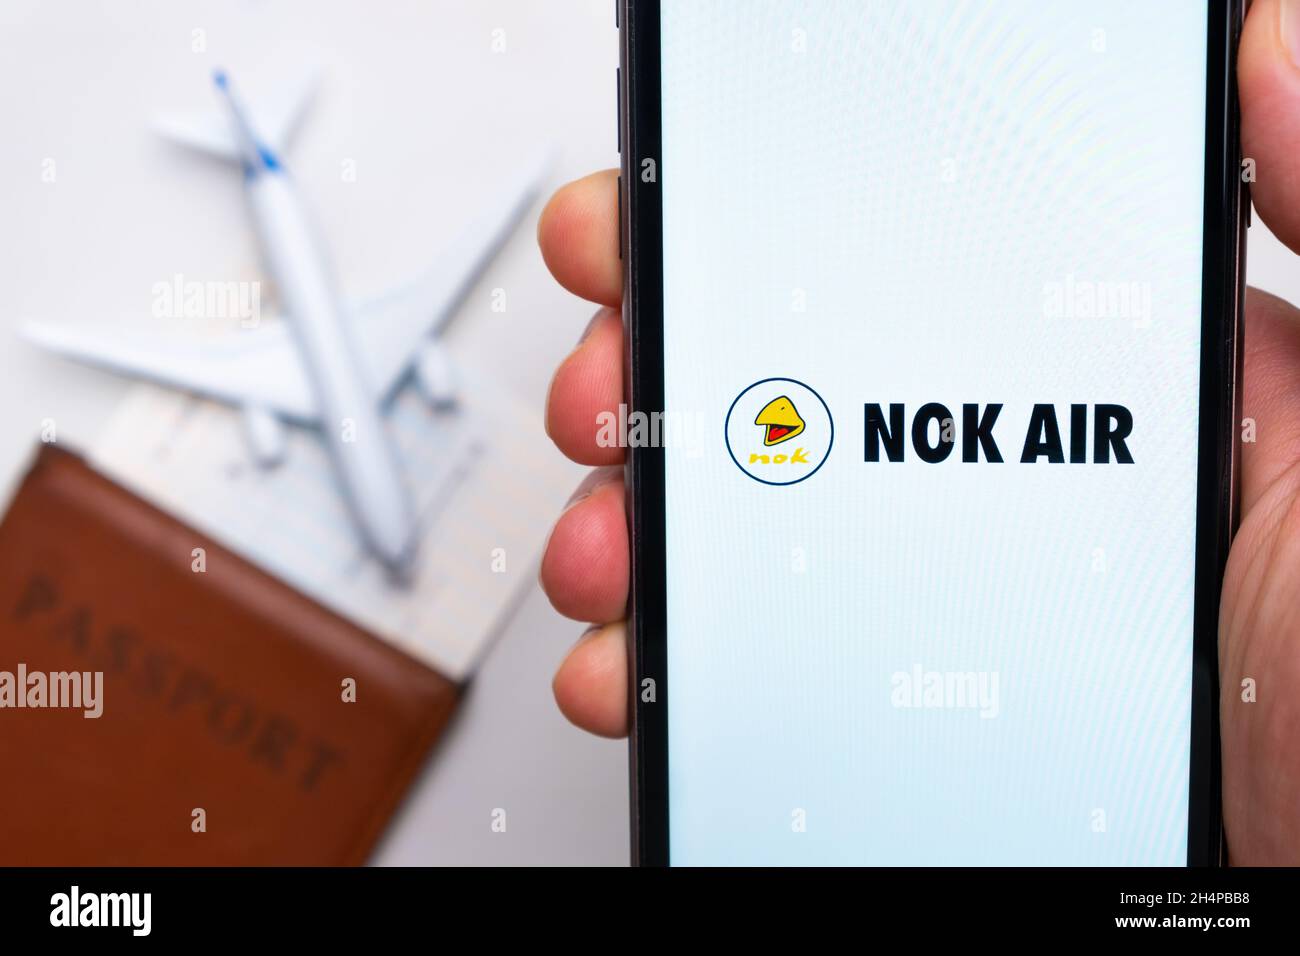 NOK AIR airlines company app or logo displayed on a mobile phone with passport, boarding pass and plane on the background, September 2021, San Stock Photo